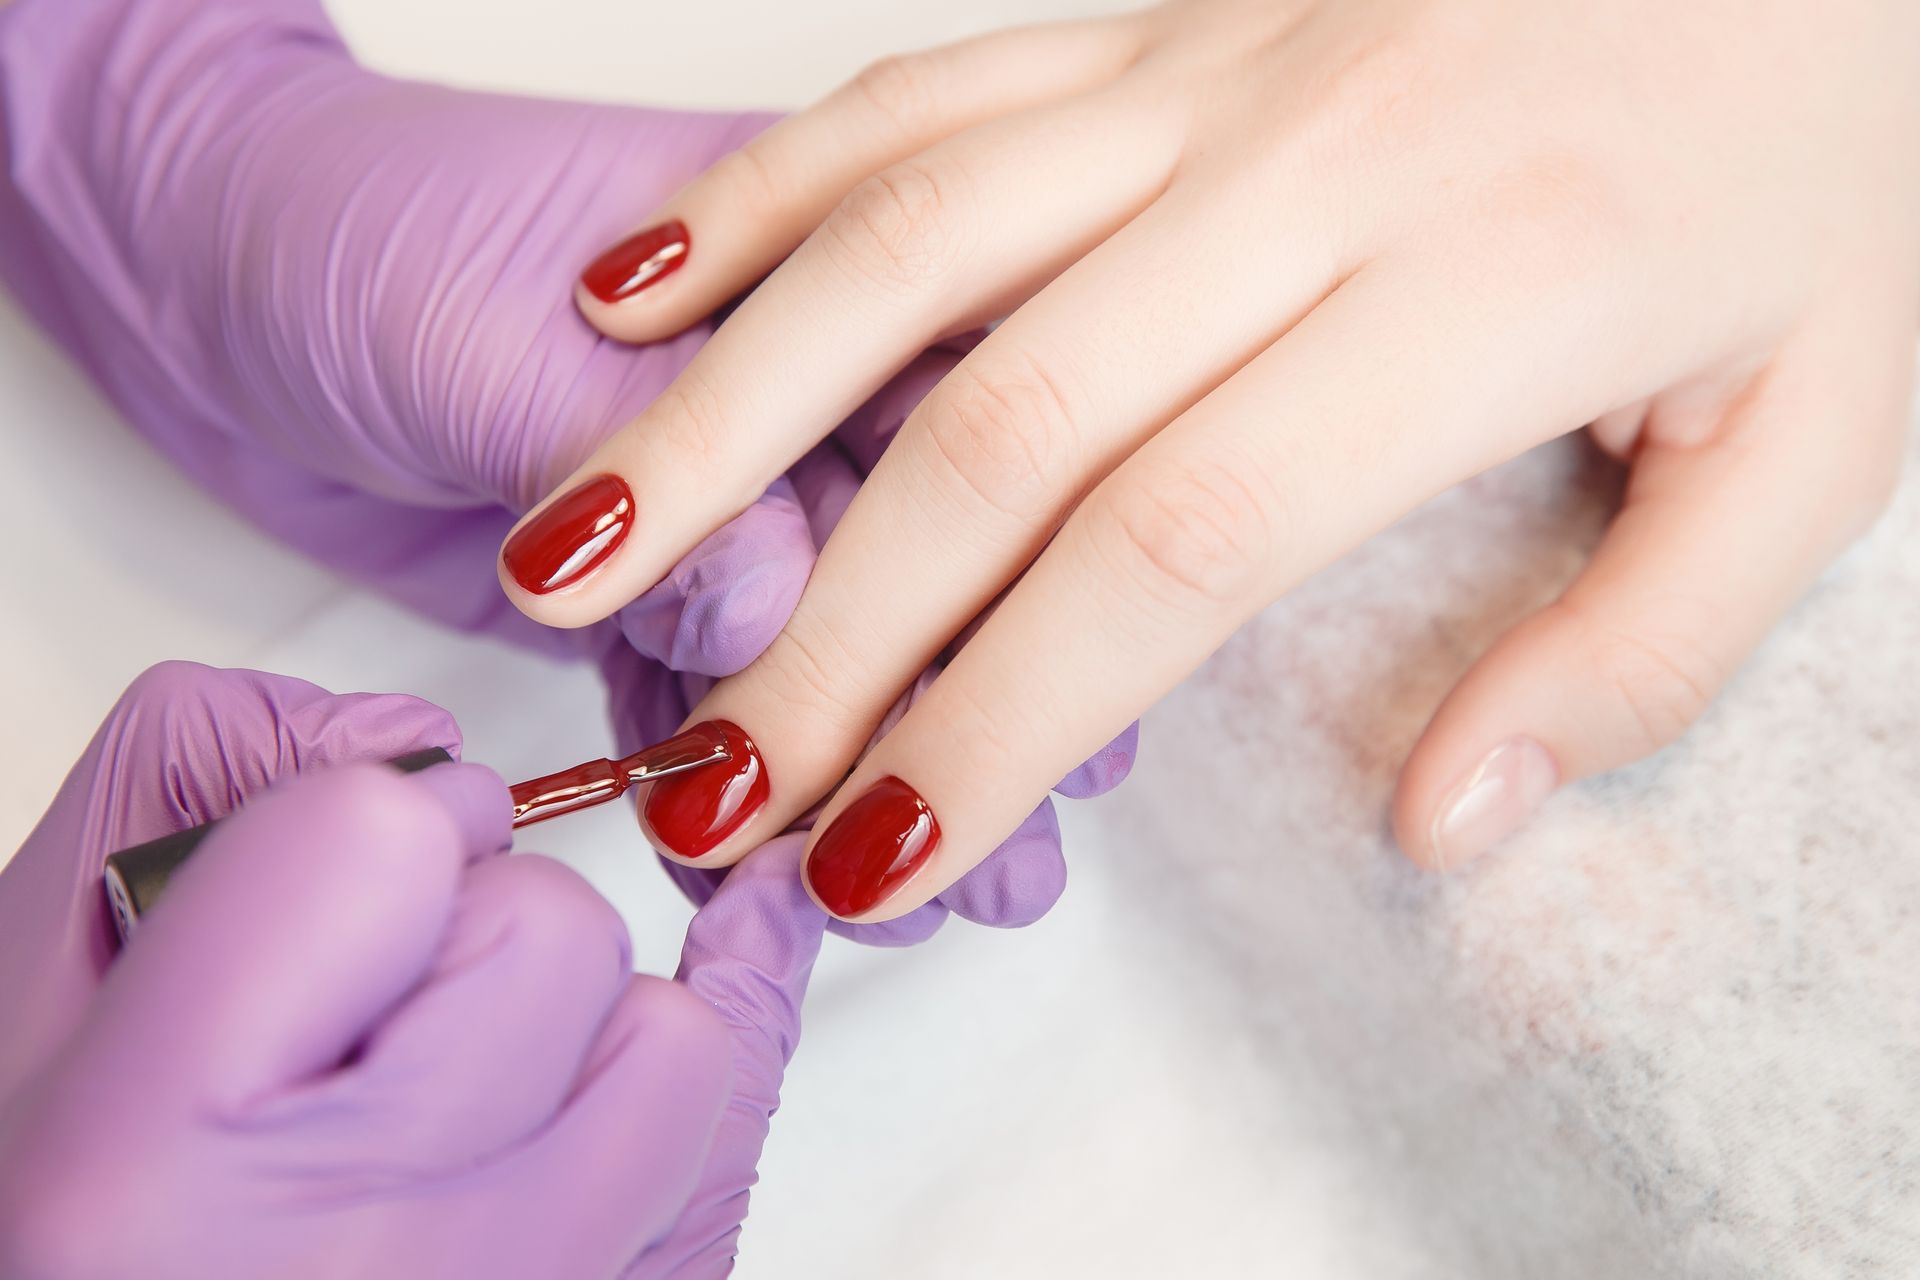 a woman is getting her nails painted red by a nail artist wearing purple gloves .